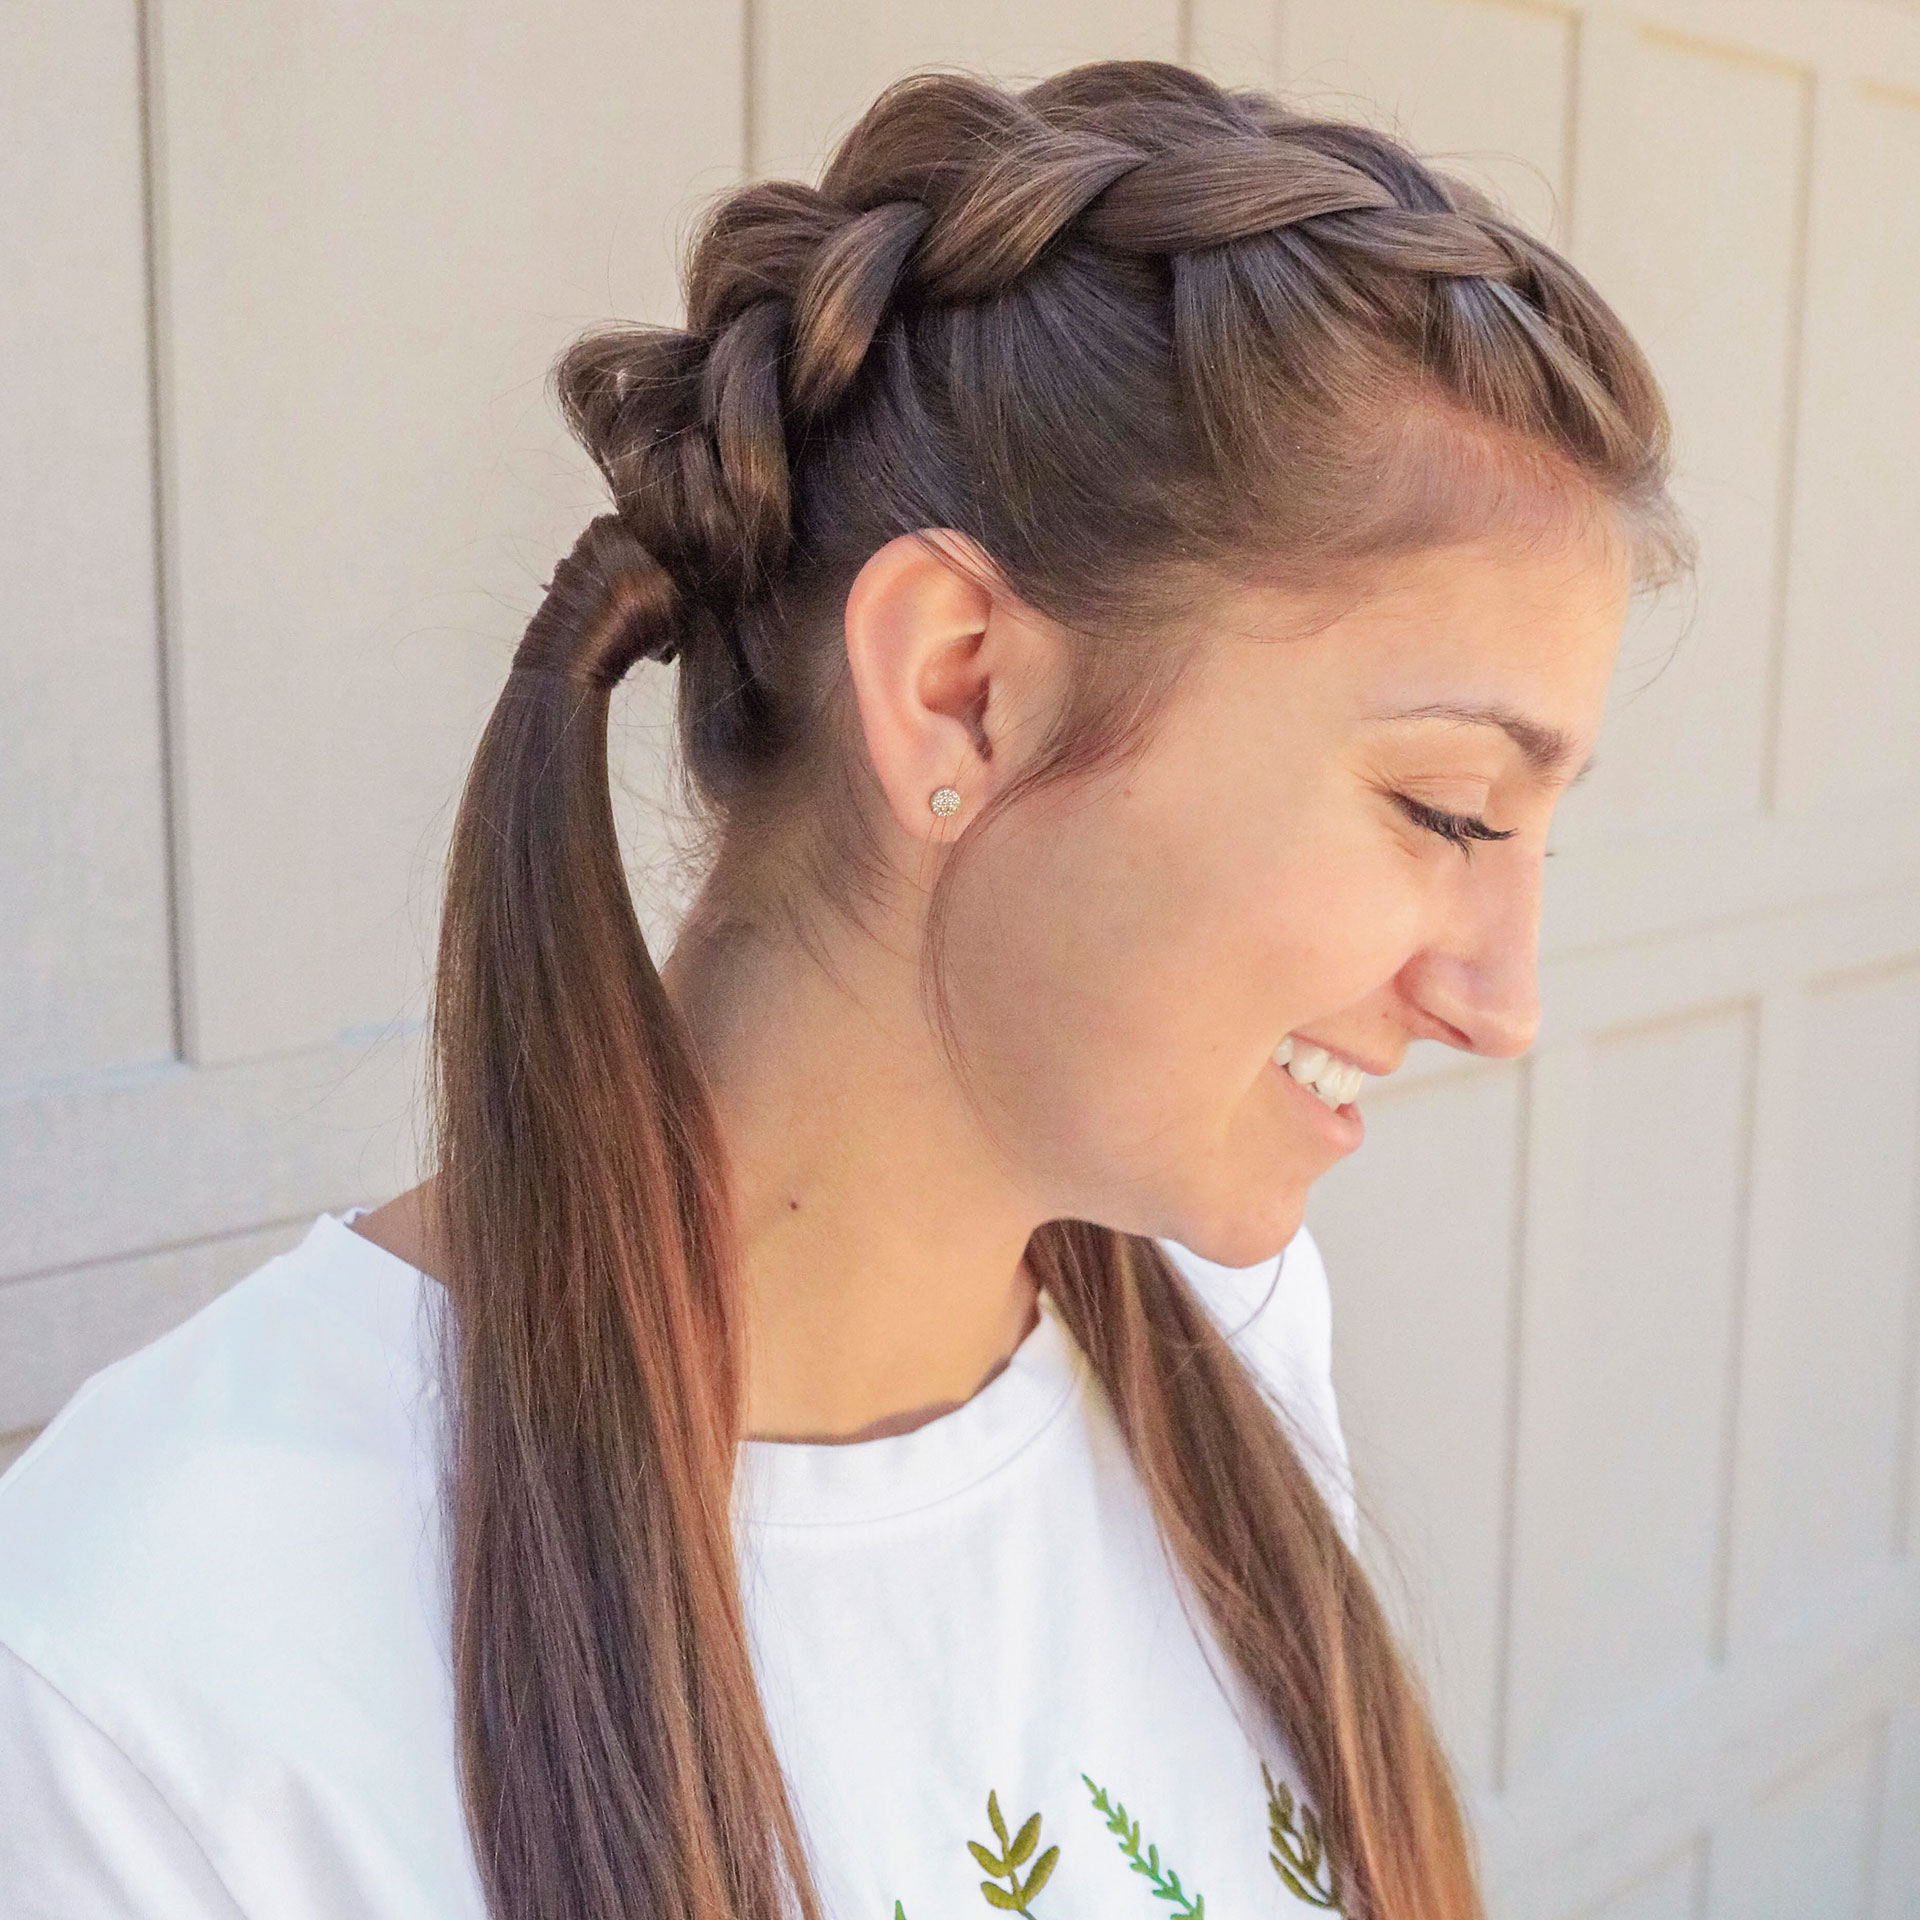 Strands of retreat: Easy hairstyle tips to try out this festive season